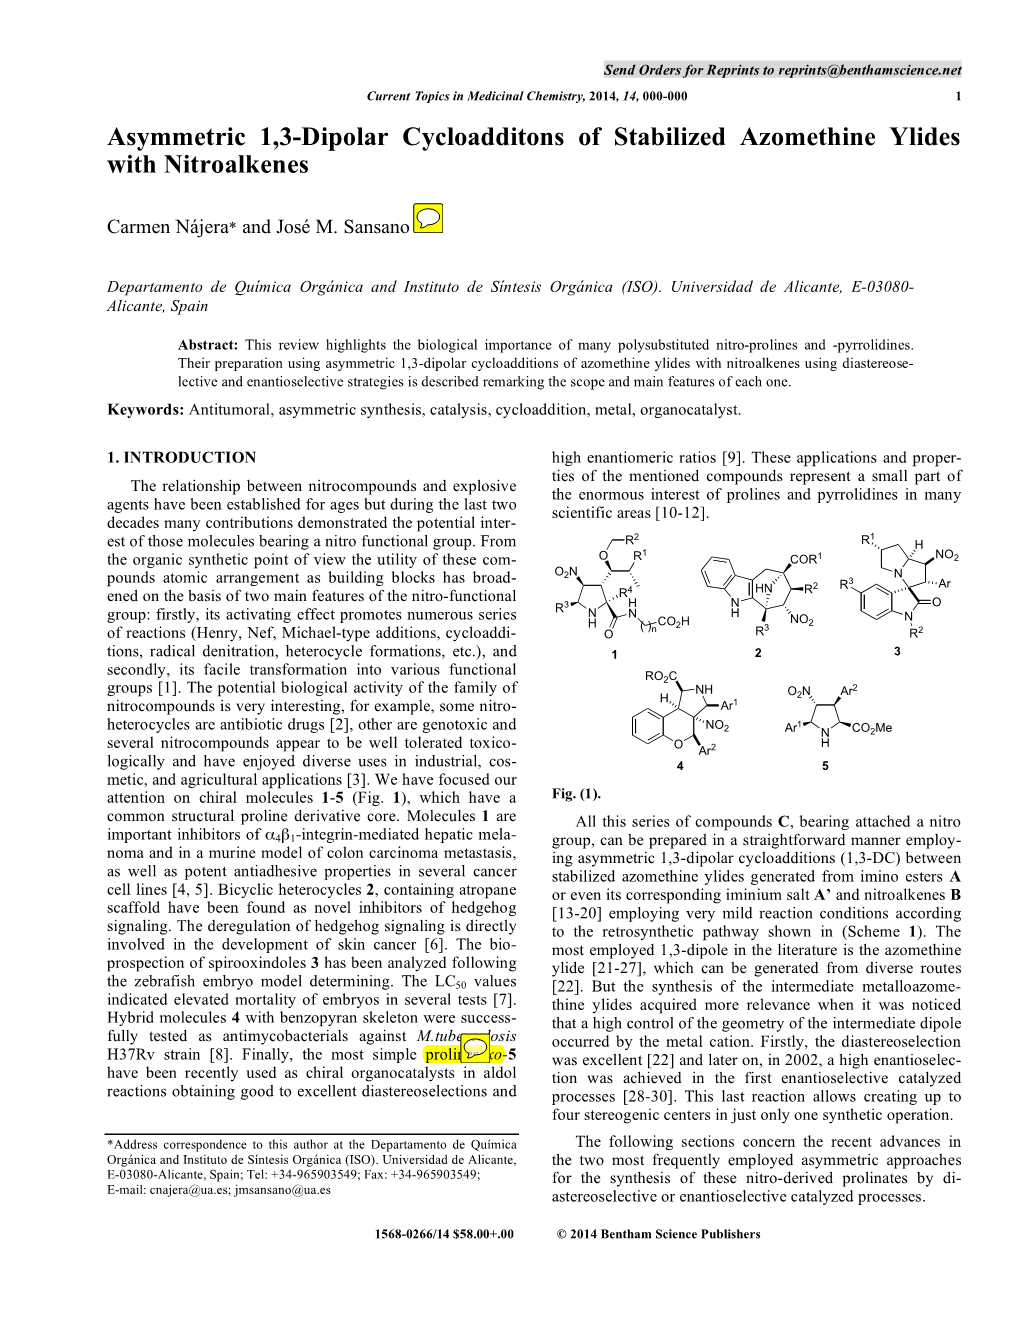 Asymmetric 1,3-Dipolar Cycloadditons of Stabilized Azomethine Ylides with Nitroalkenes